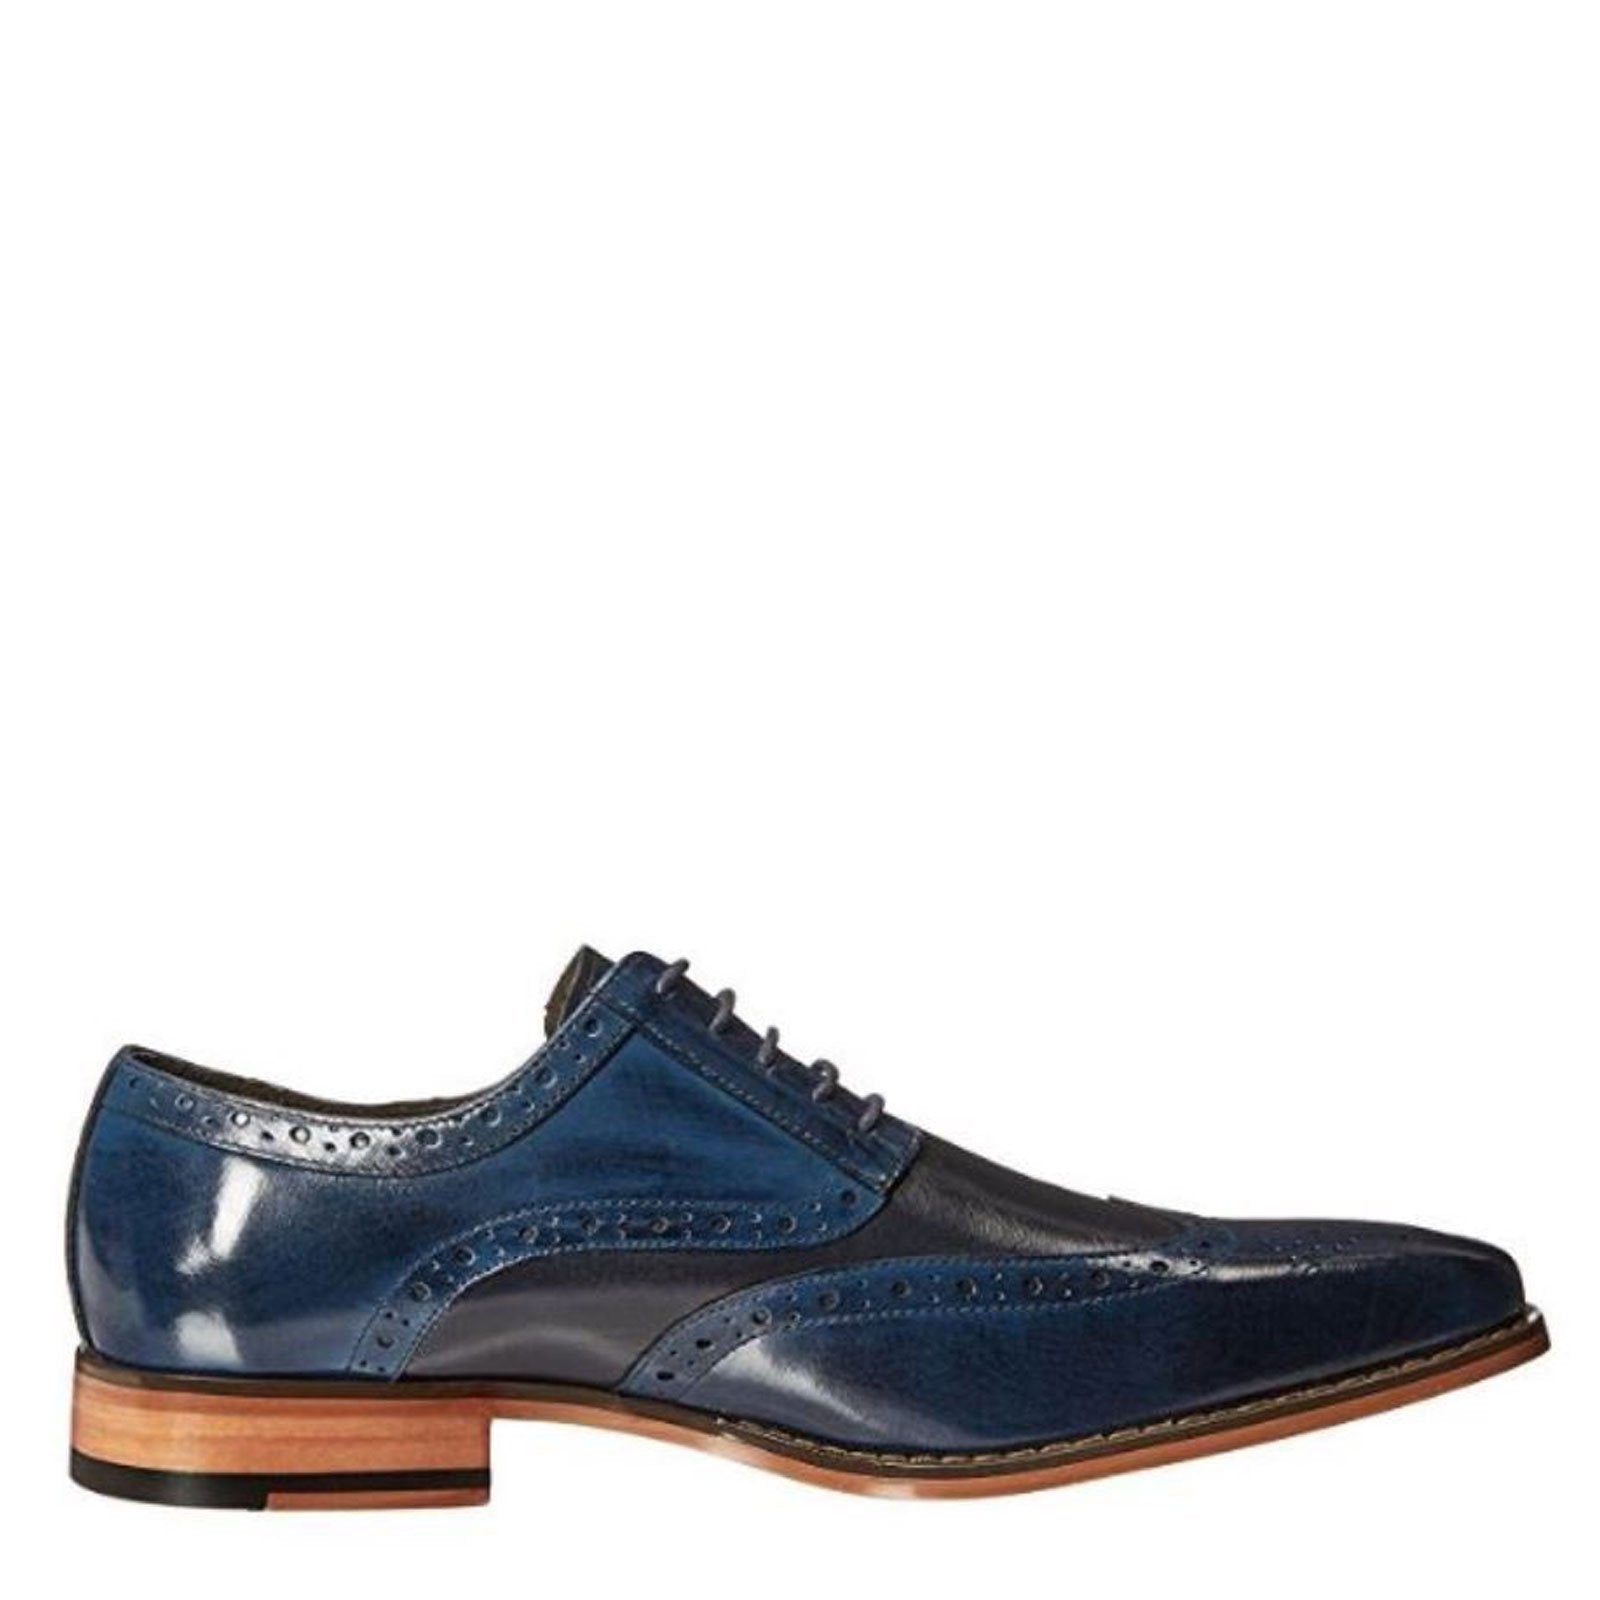 navy blue stacy adams shoes